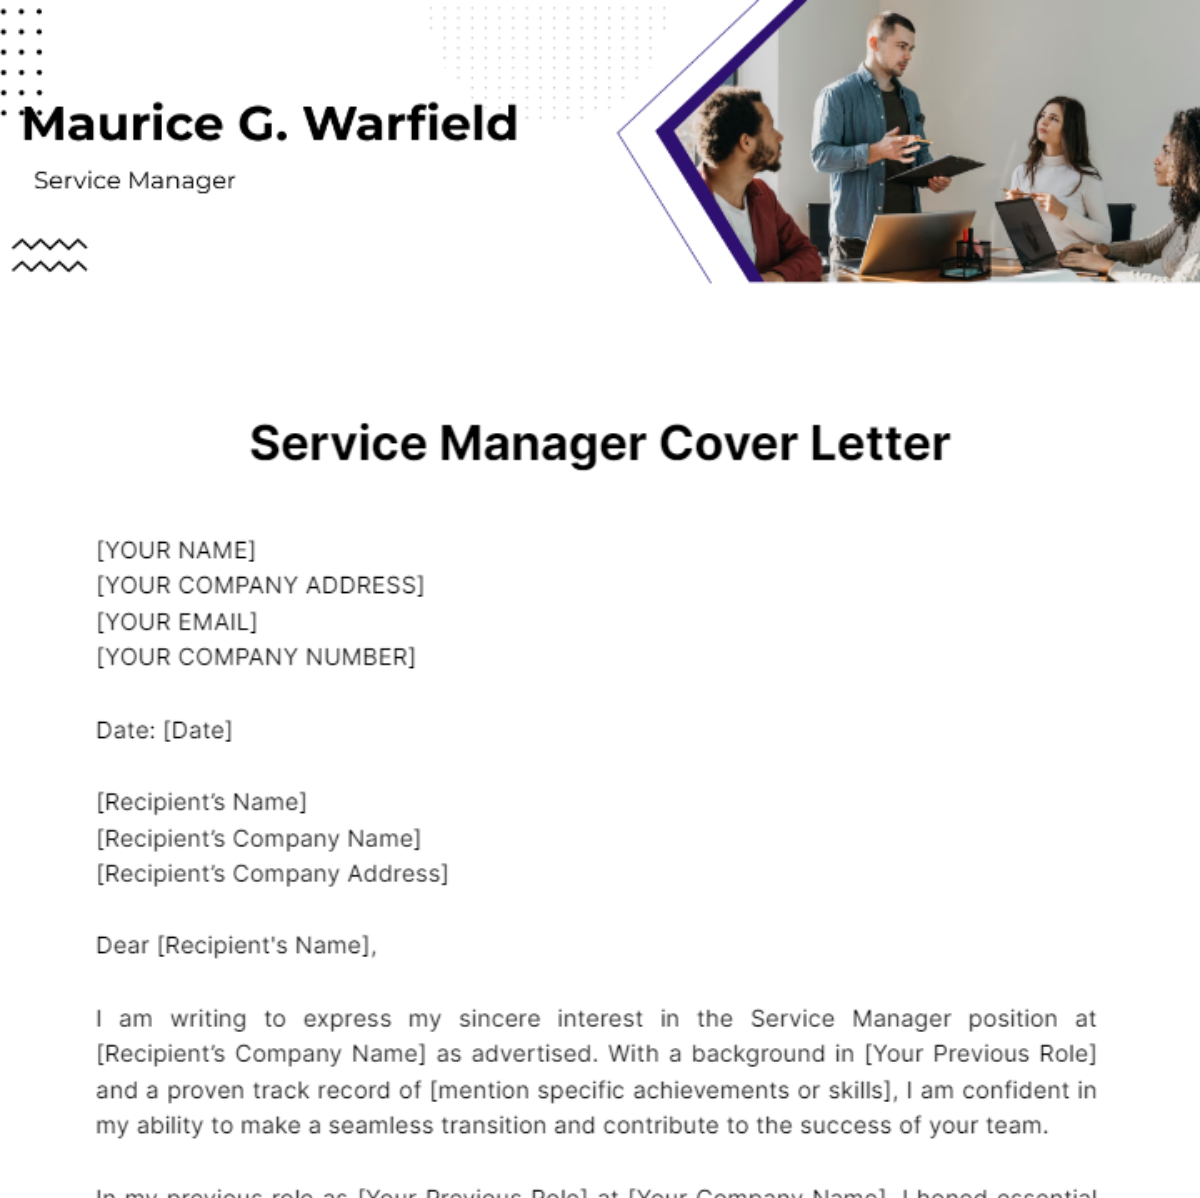 Service Manager Cover Letter Template